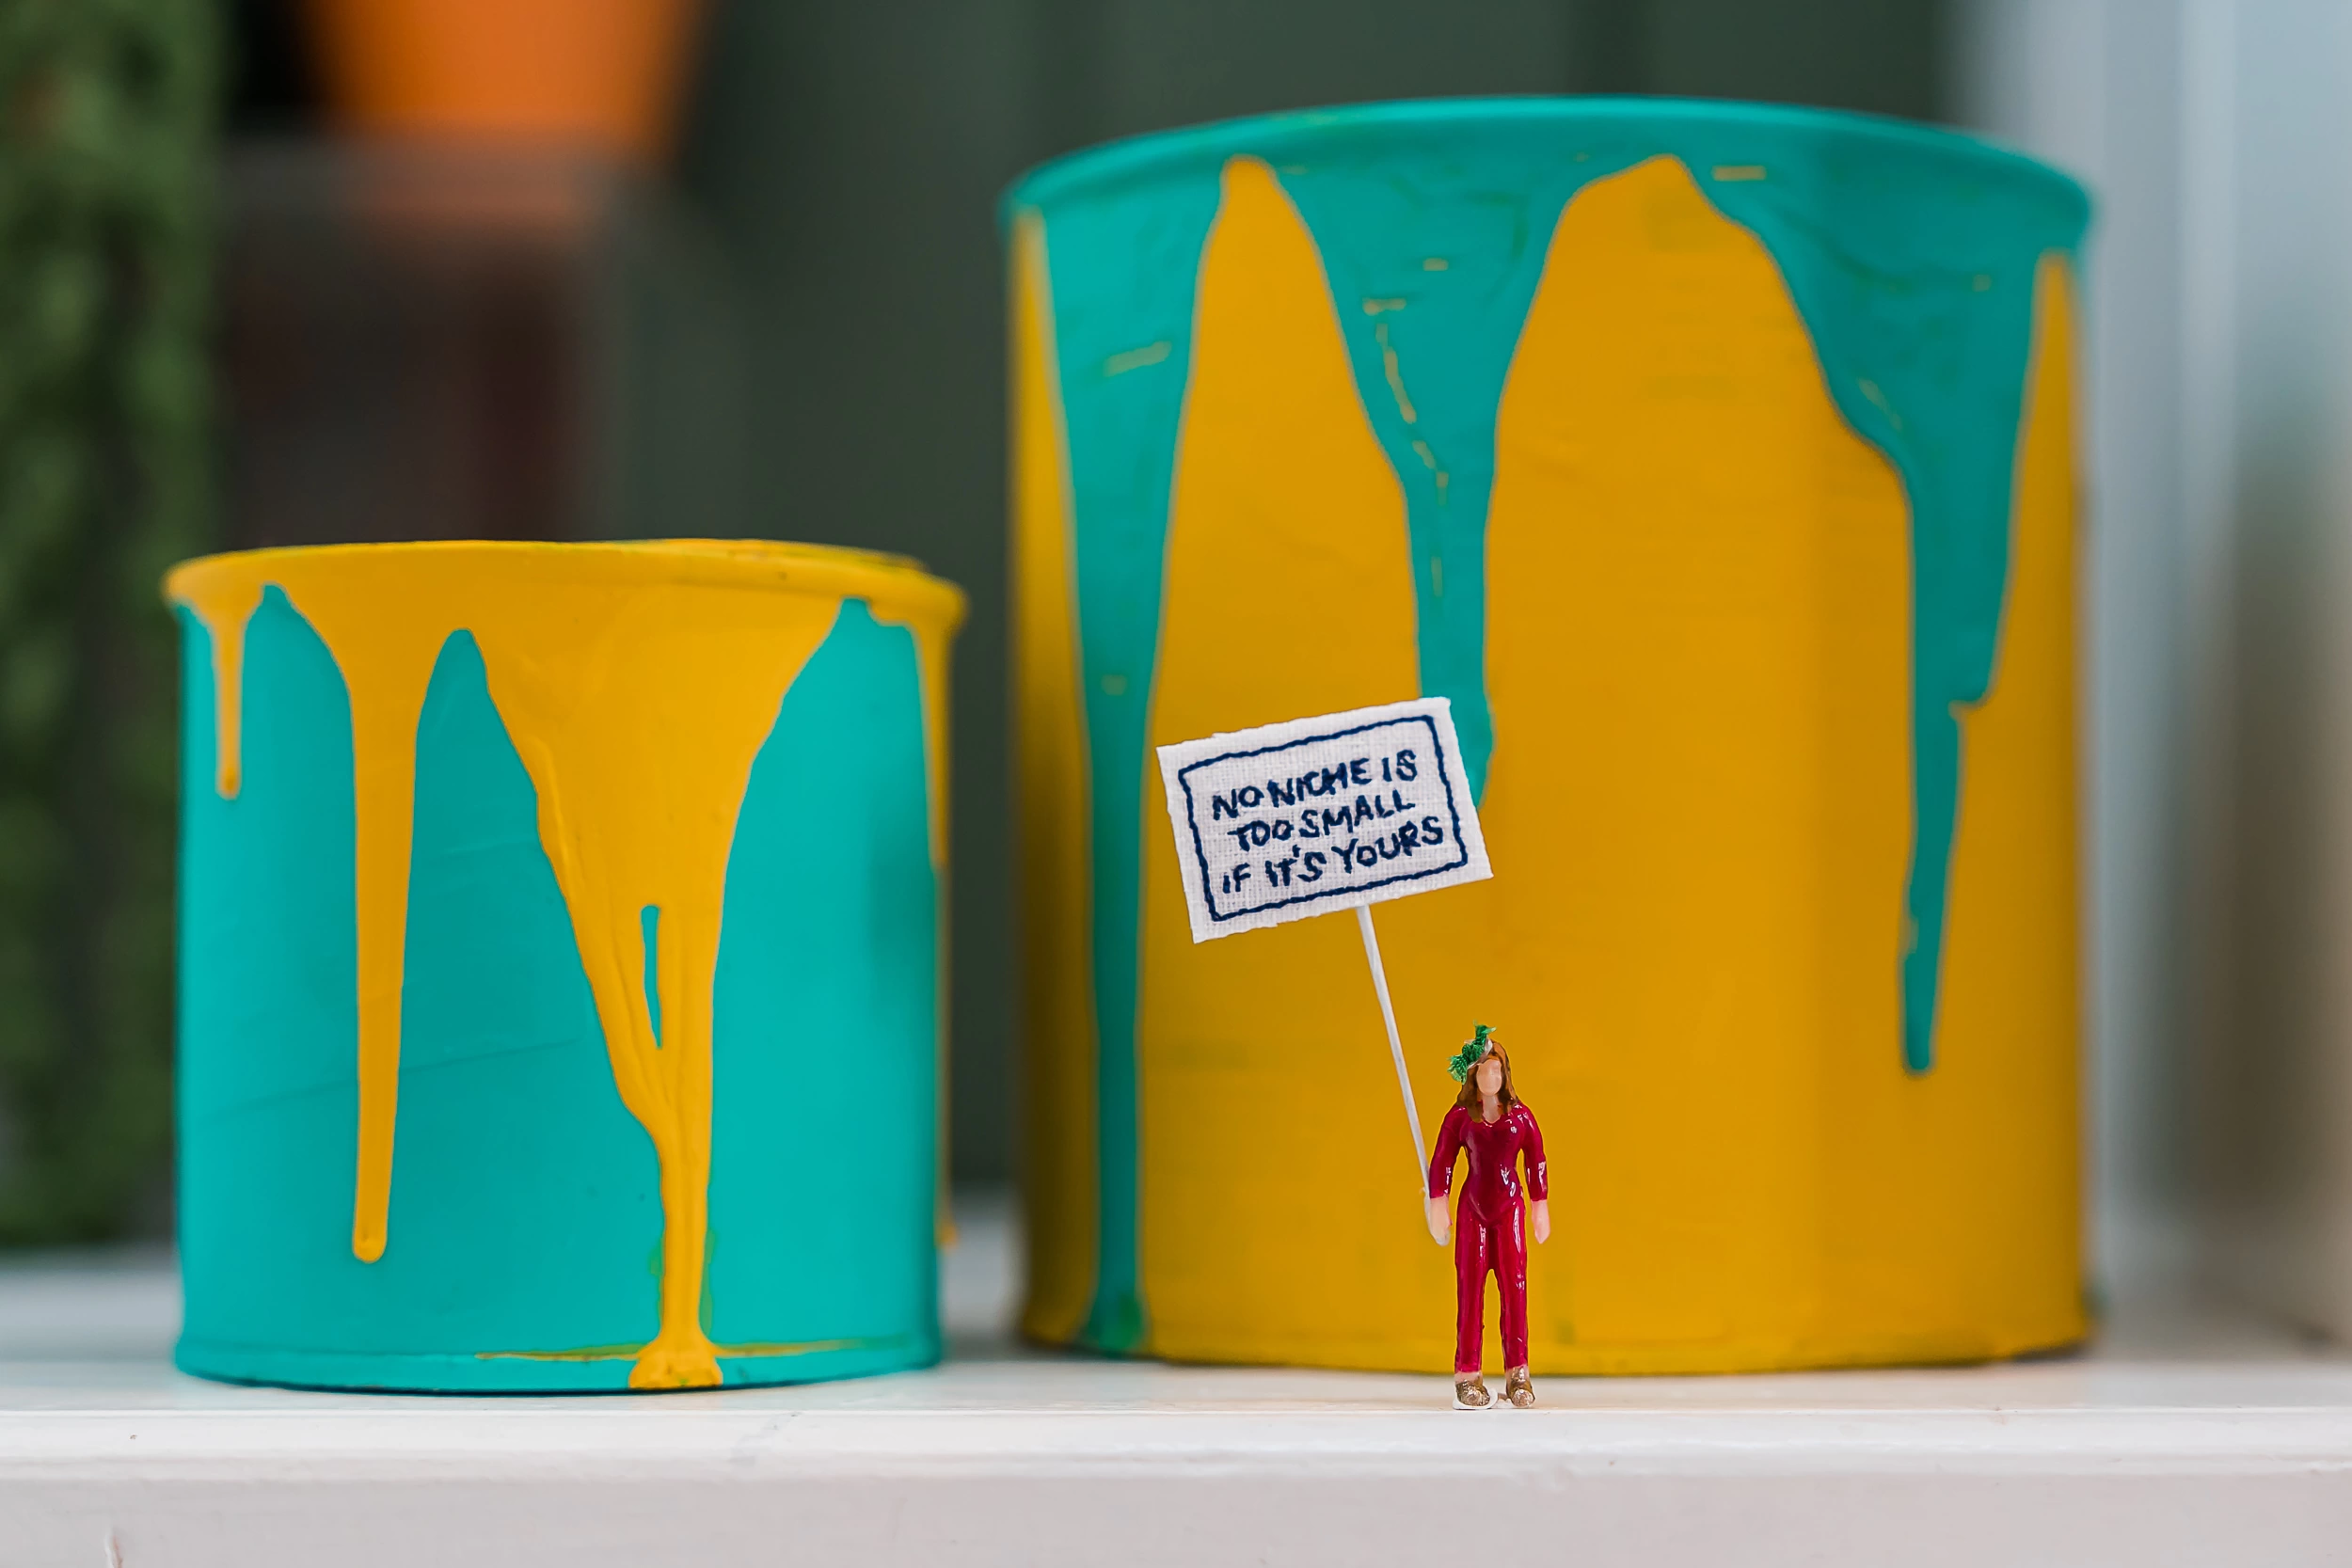 Two paint cans with small woman figurine holding sign no niche is too small if it's your niche 